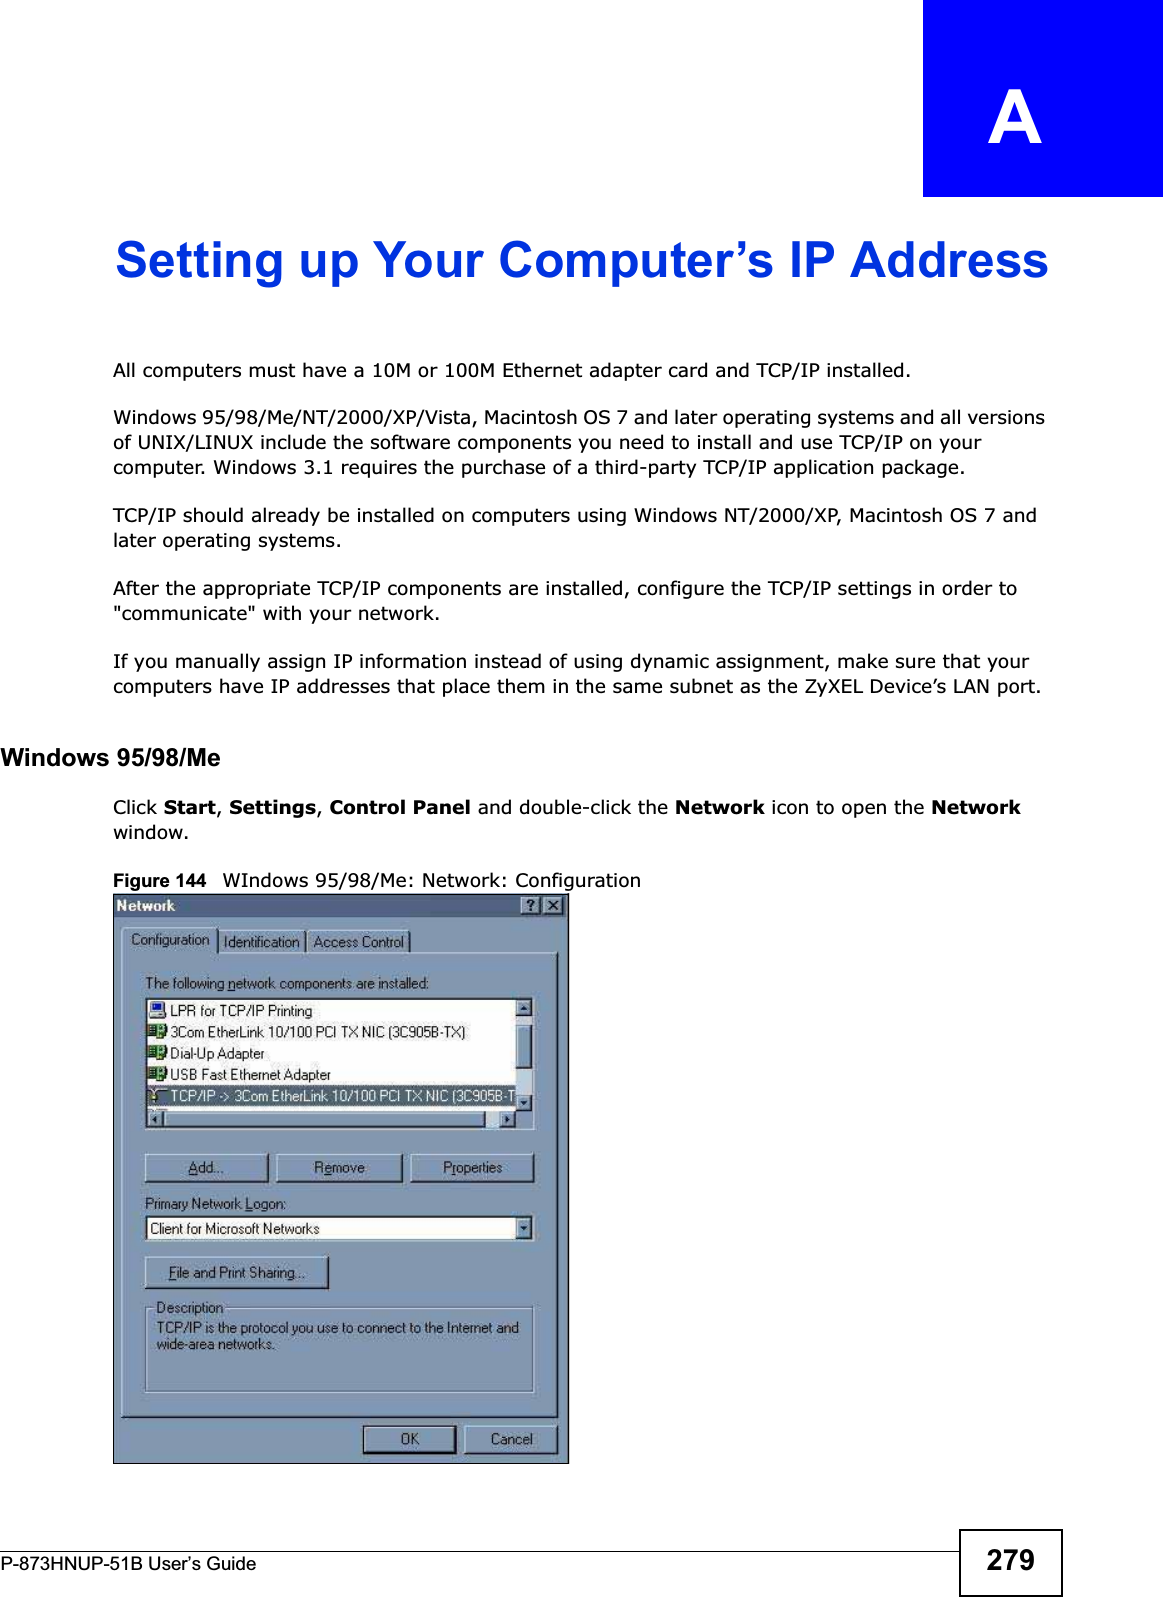 P-873HNUP-51B User’s Guide 279APPENDIX   ASetting up Your Computer’s IP AddressAll computers must have a 10M or 100M Ethernet adapter card and TCP/IP installed. Windows 95/98/Me/NT/2000/XP/Vista, Macintosh OS 7 and later operating systems and all versions of UNIX/LINUX include the software components you need to install and use TCP/IP on your computer. Windows 3.1 requires the purchase of a third-party TCP/IP application package.TCP/IP should already be installed on computers using Windows NT/2000/XP, Macintosh OS 7 and later operating systems.After the appropriate TCP/IP components are installed, configure the TCP/IP settings in order to &quot;communicate&quot; with your network. If you manually assign IP information instead of using dynamic assignment, make sure that your computers have IP addresses that place them in the same subnet as the ZyXEL Device’s LAN port.Windows 95/98/MeClick Start,Settings,Control Panel and double-click the Network icon to open the Network window.Figure 144   WIndows 95/98/Me: Network: Configuration